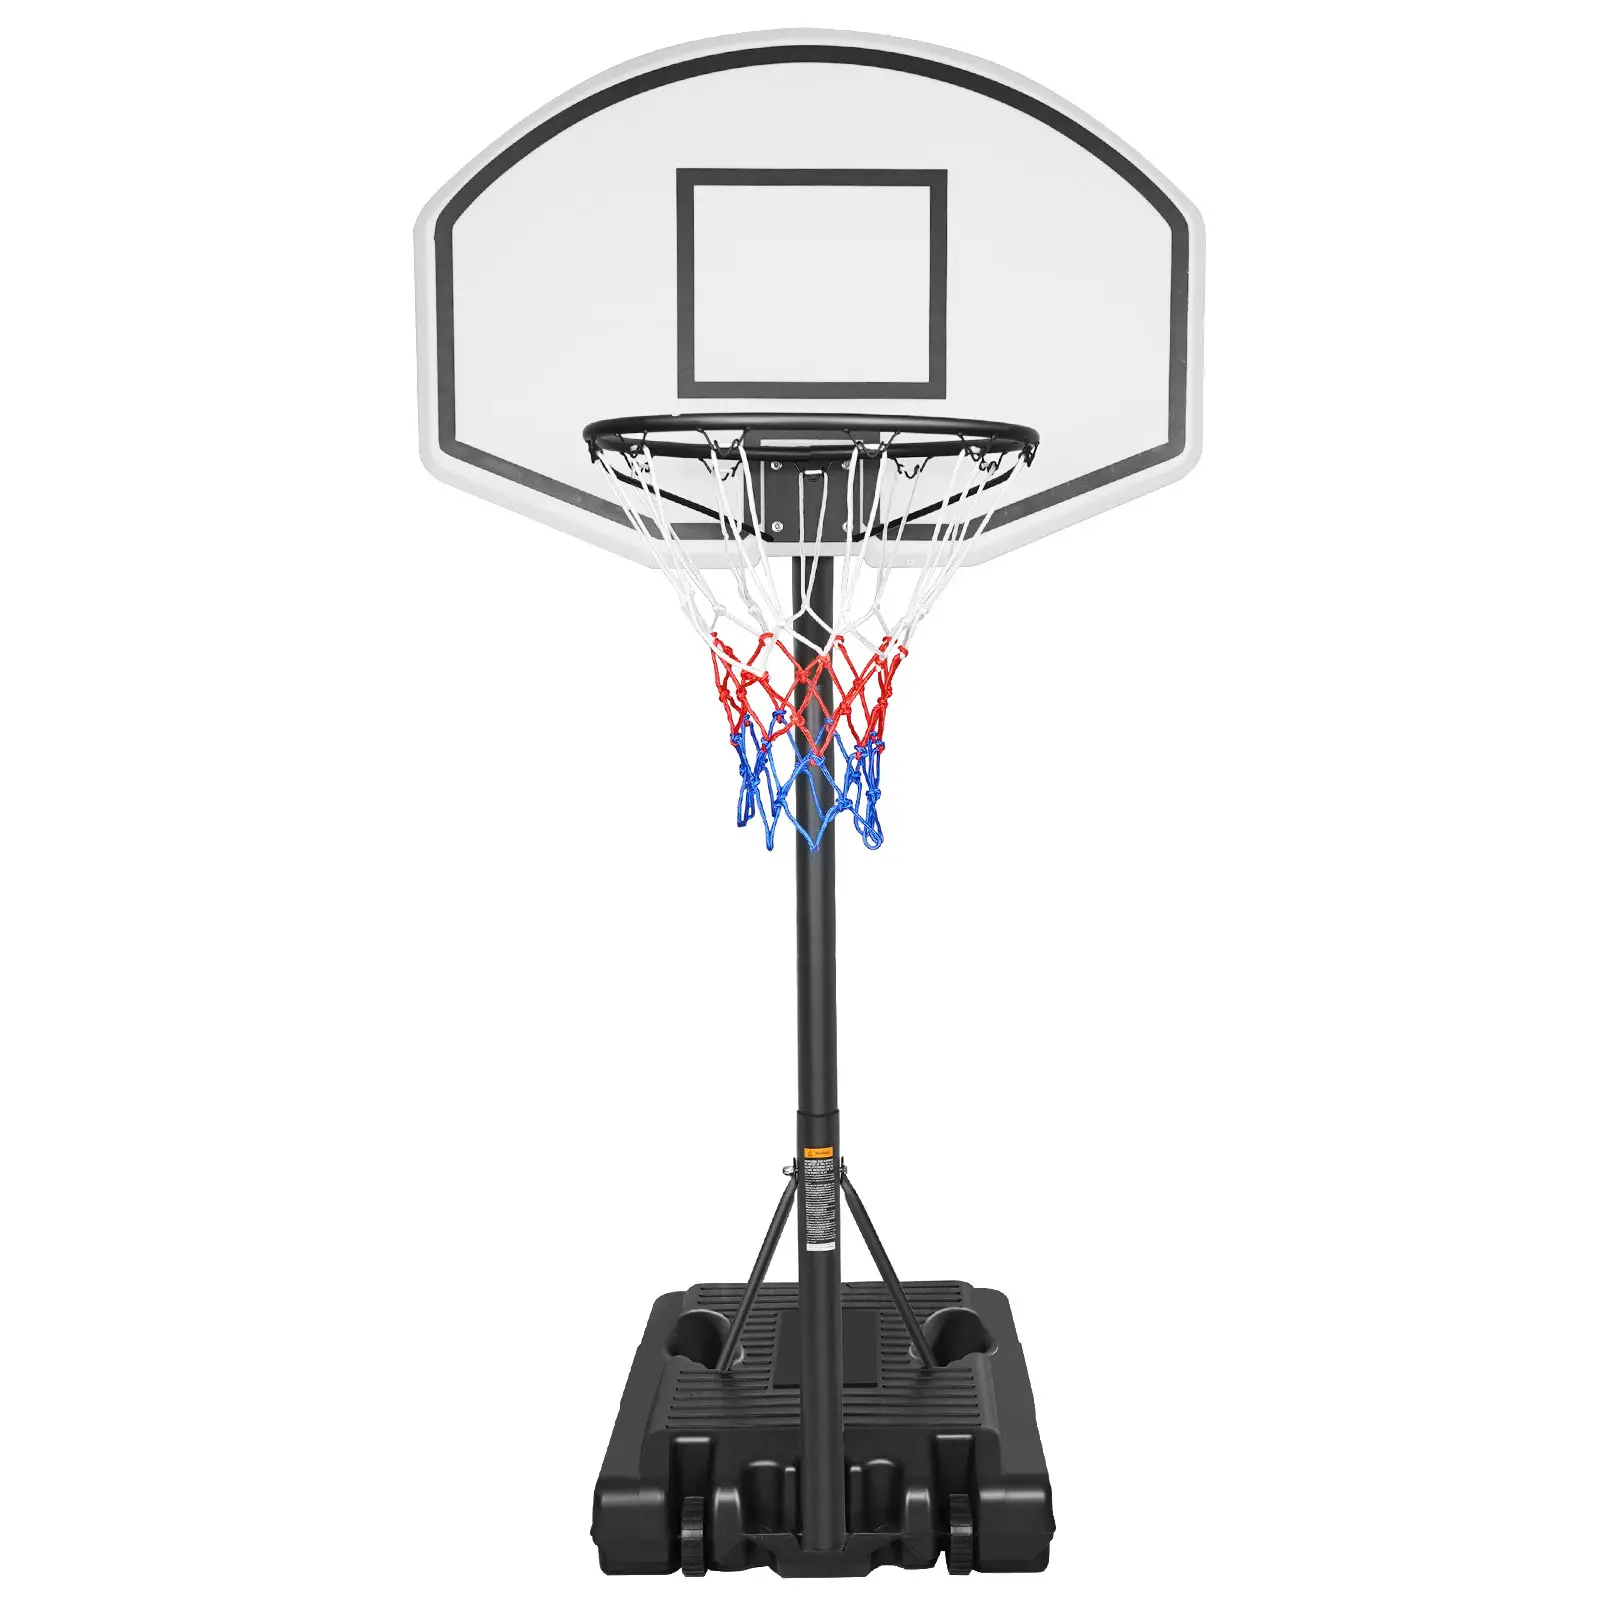 New Style Water Sports Customize Swimming Pool Basketball Game Water Poolside Basketball Hoop Manufacture